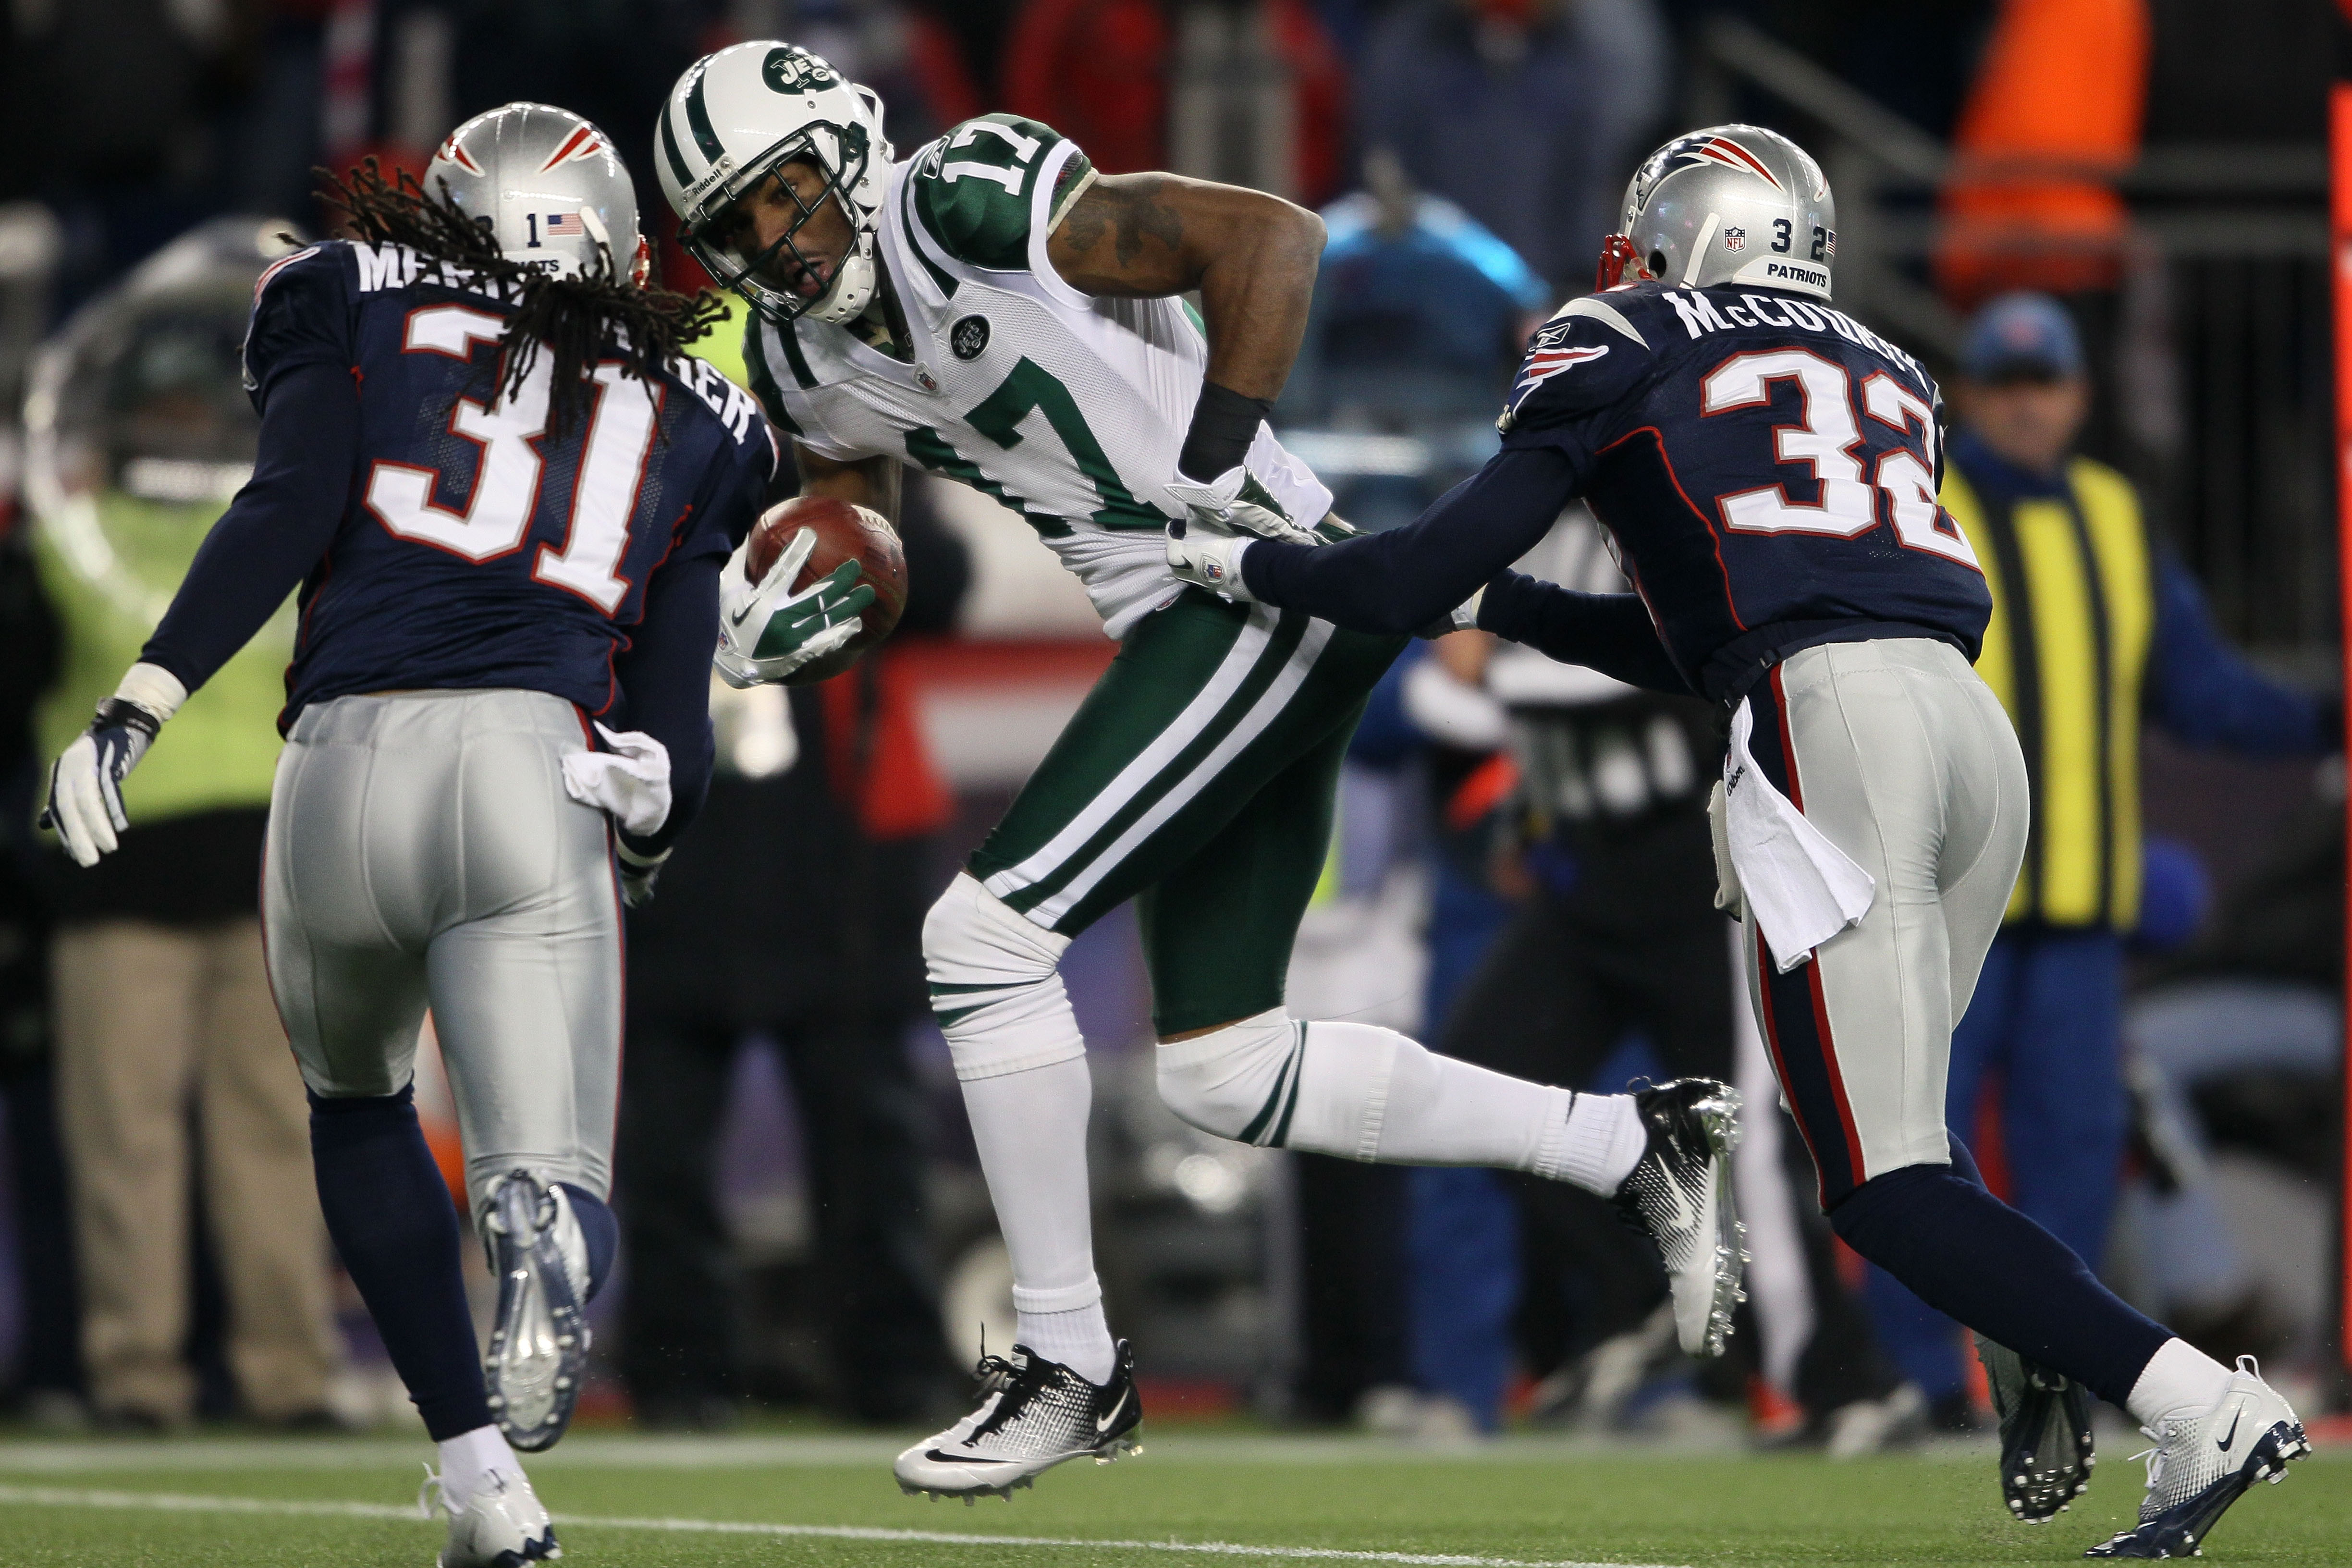 FOXBORO, MA - JANUARY 16:  Wide receiver Braylon Edwards #17 of the New York Jets runs with the ball during their 2011 AFC divisional playoff game against the New England Patriots at Gillette Stadium on January 16, 2011 in Foxboro, Massachusetts.  (Photo